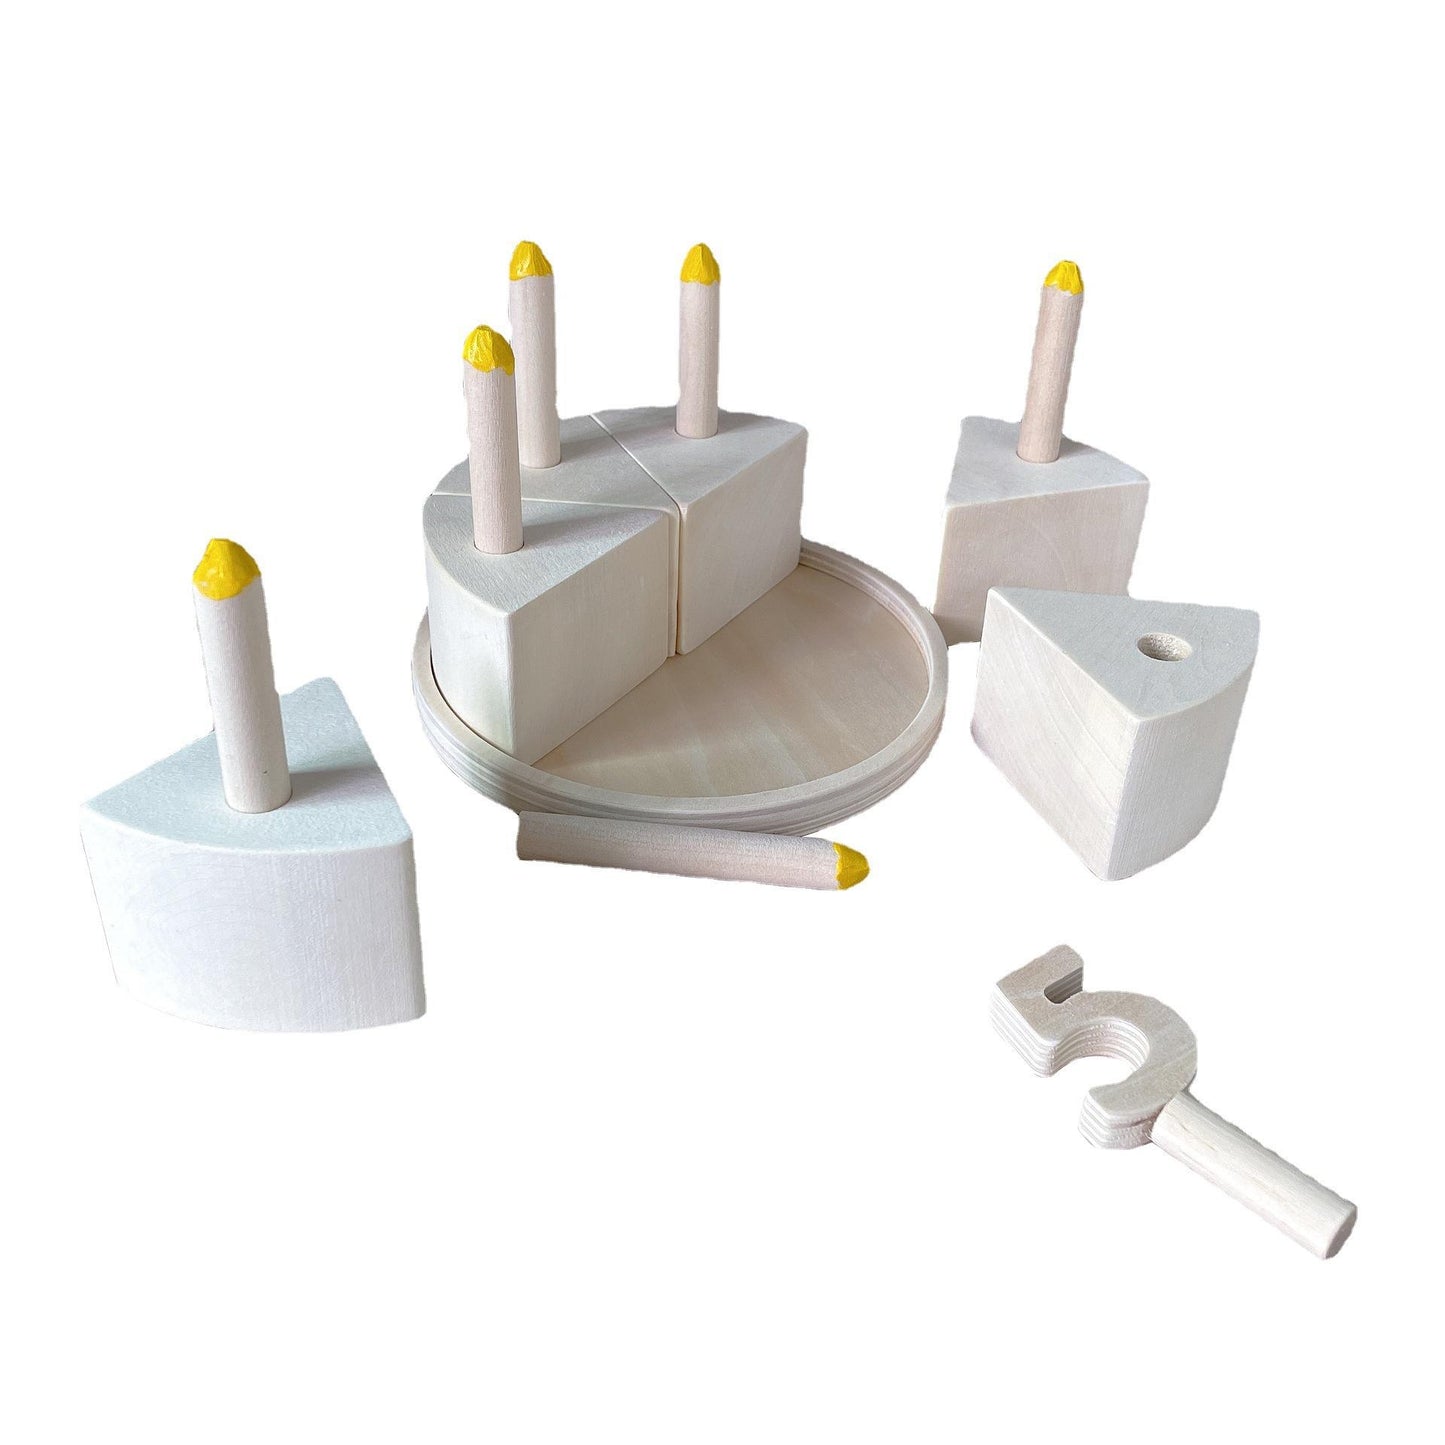 Wooden pretend cake set toy over white background